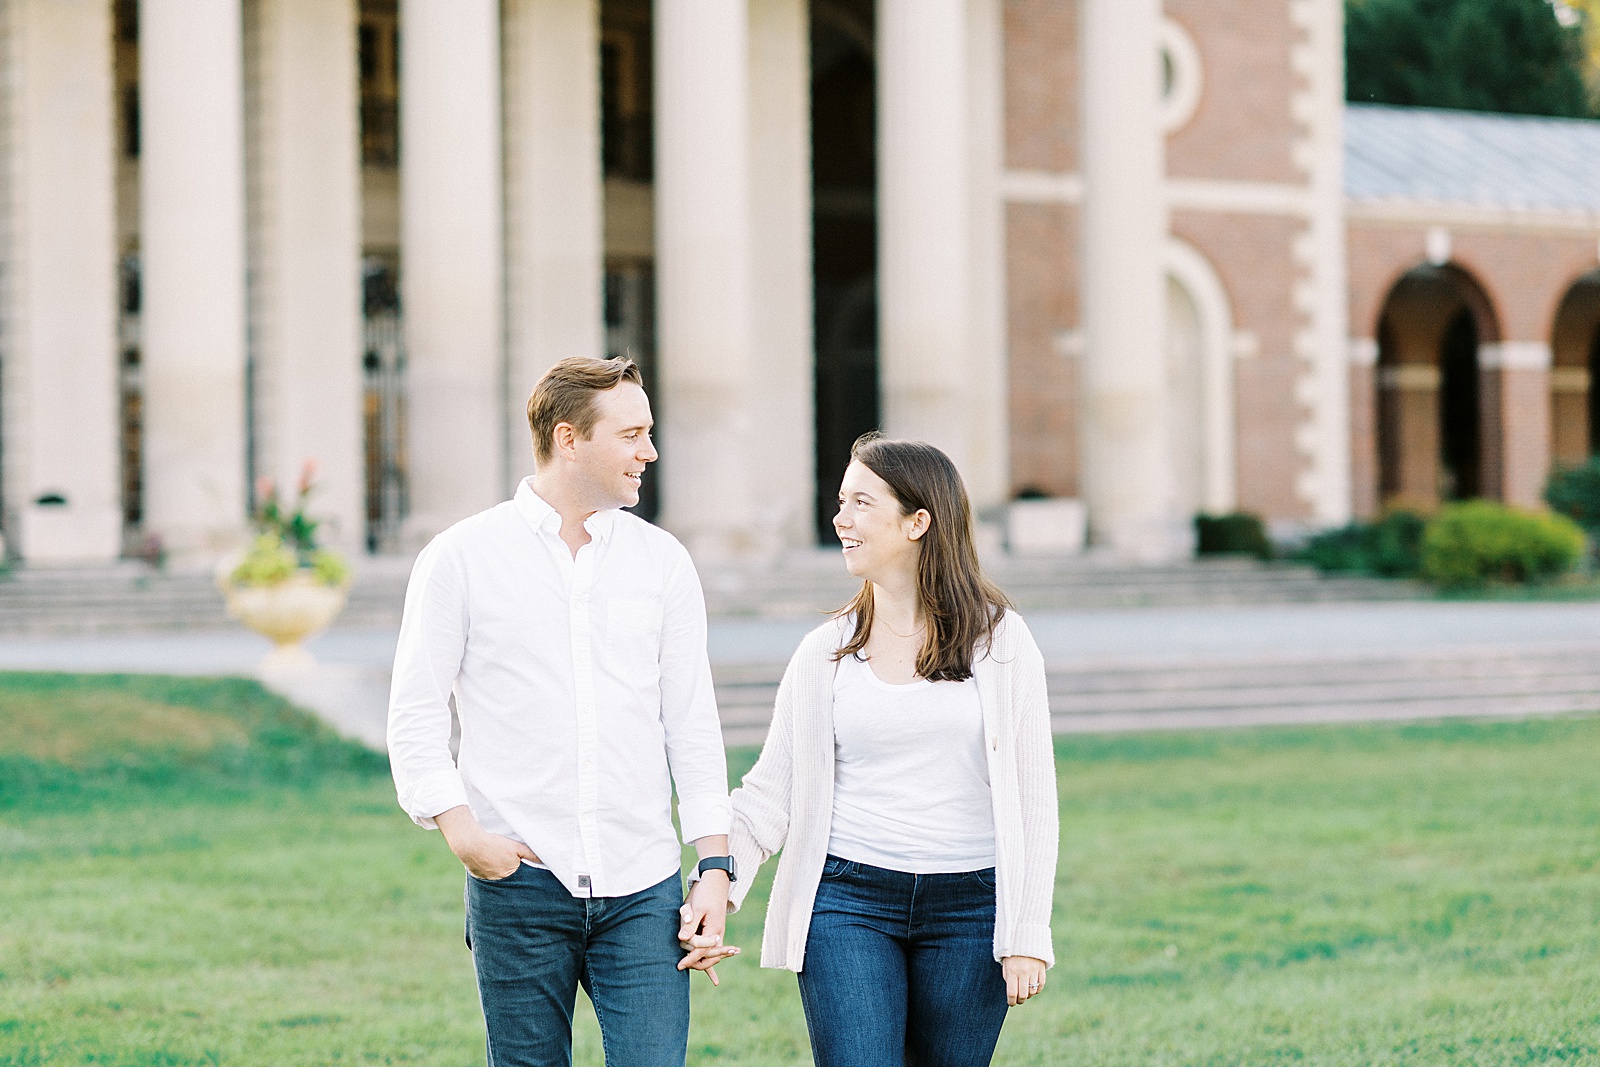 Brunette woman and blonde man in white shirts walk across a New York campus for photo shoot 